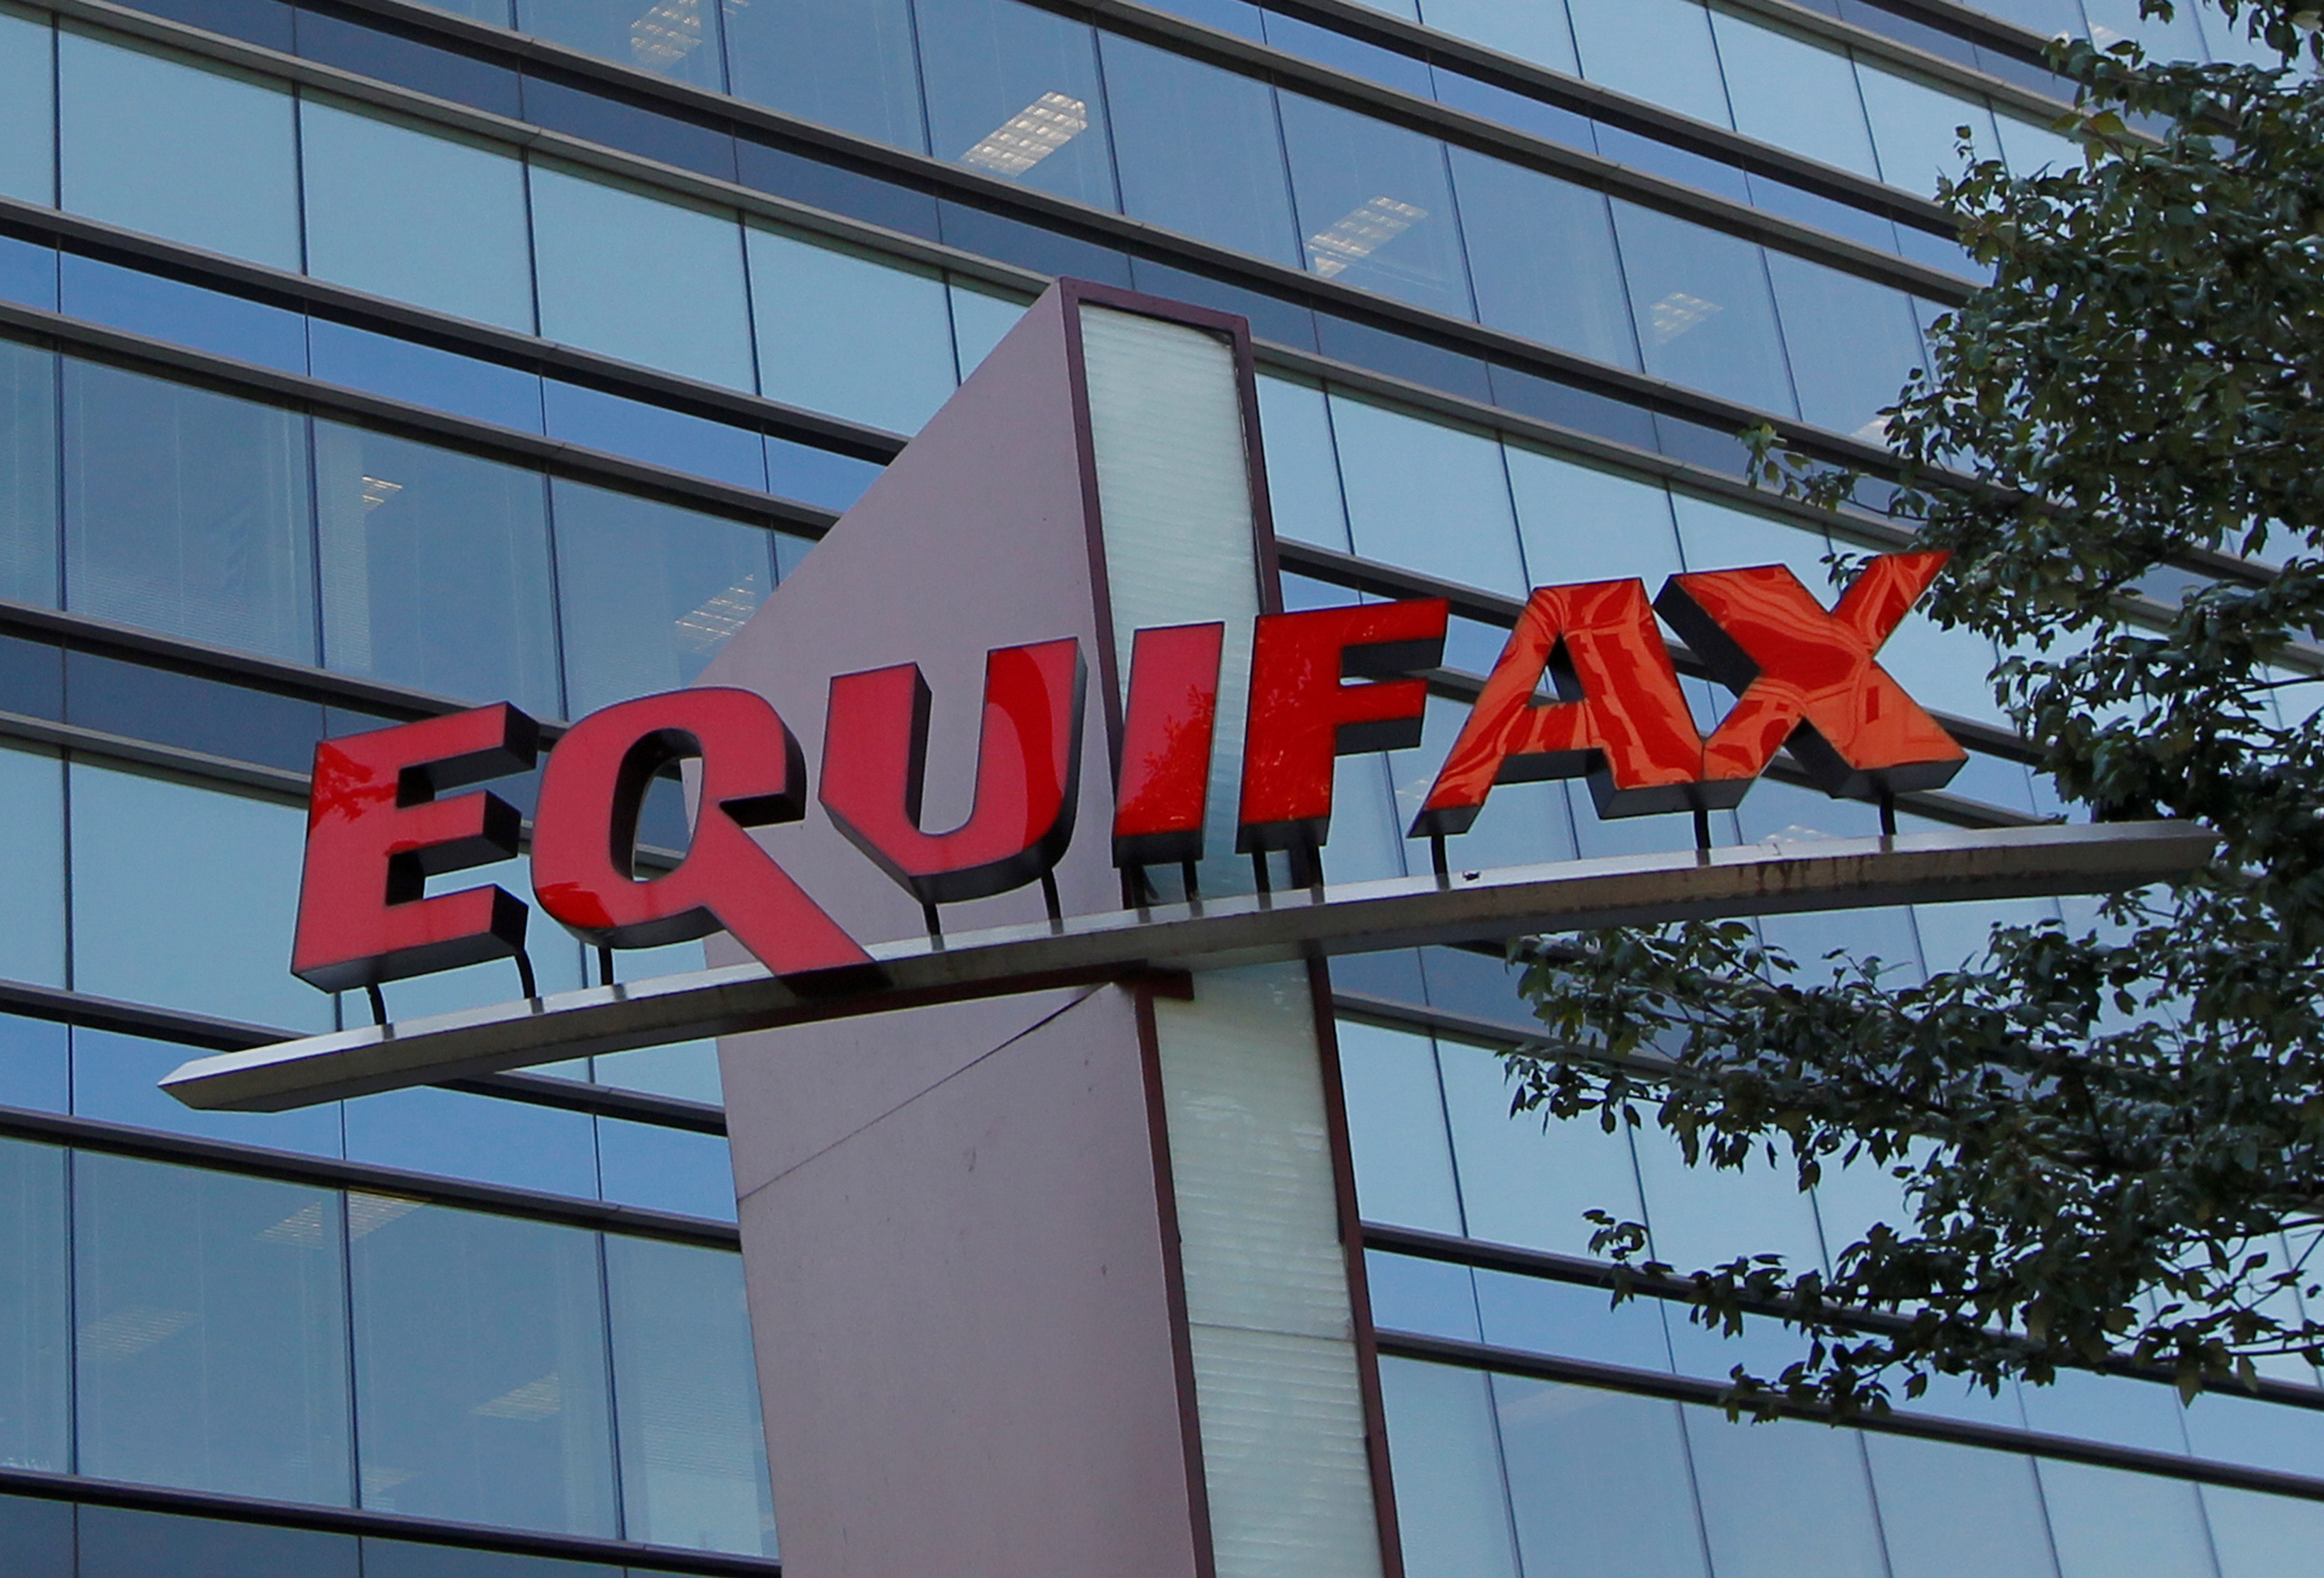 The Equifax logo